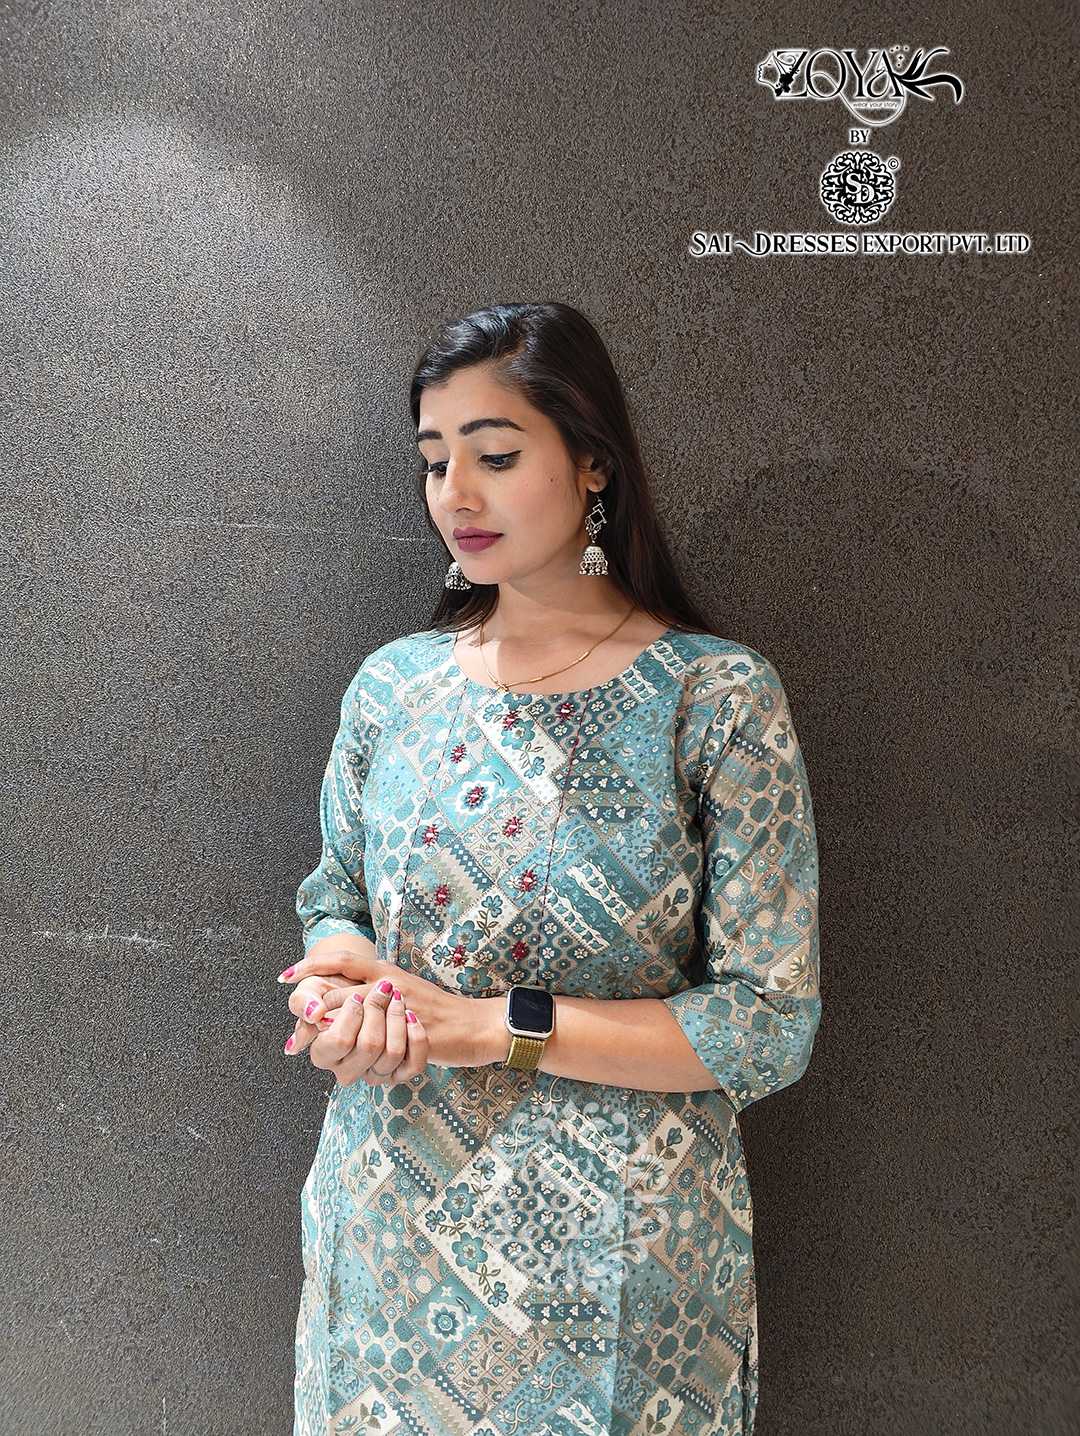 SAI DRESSES PRESENT D.NO SD83 READY TO WEAR BEAUTIFUL MUSLIN PRINTED STRAIGHT KURTI COMBO COLLECTION IN WHOLESALE RATE IN SURAT